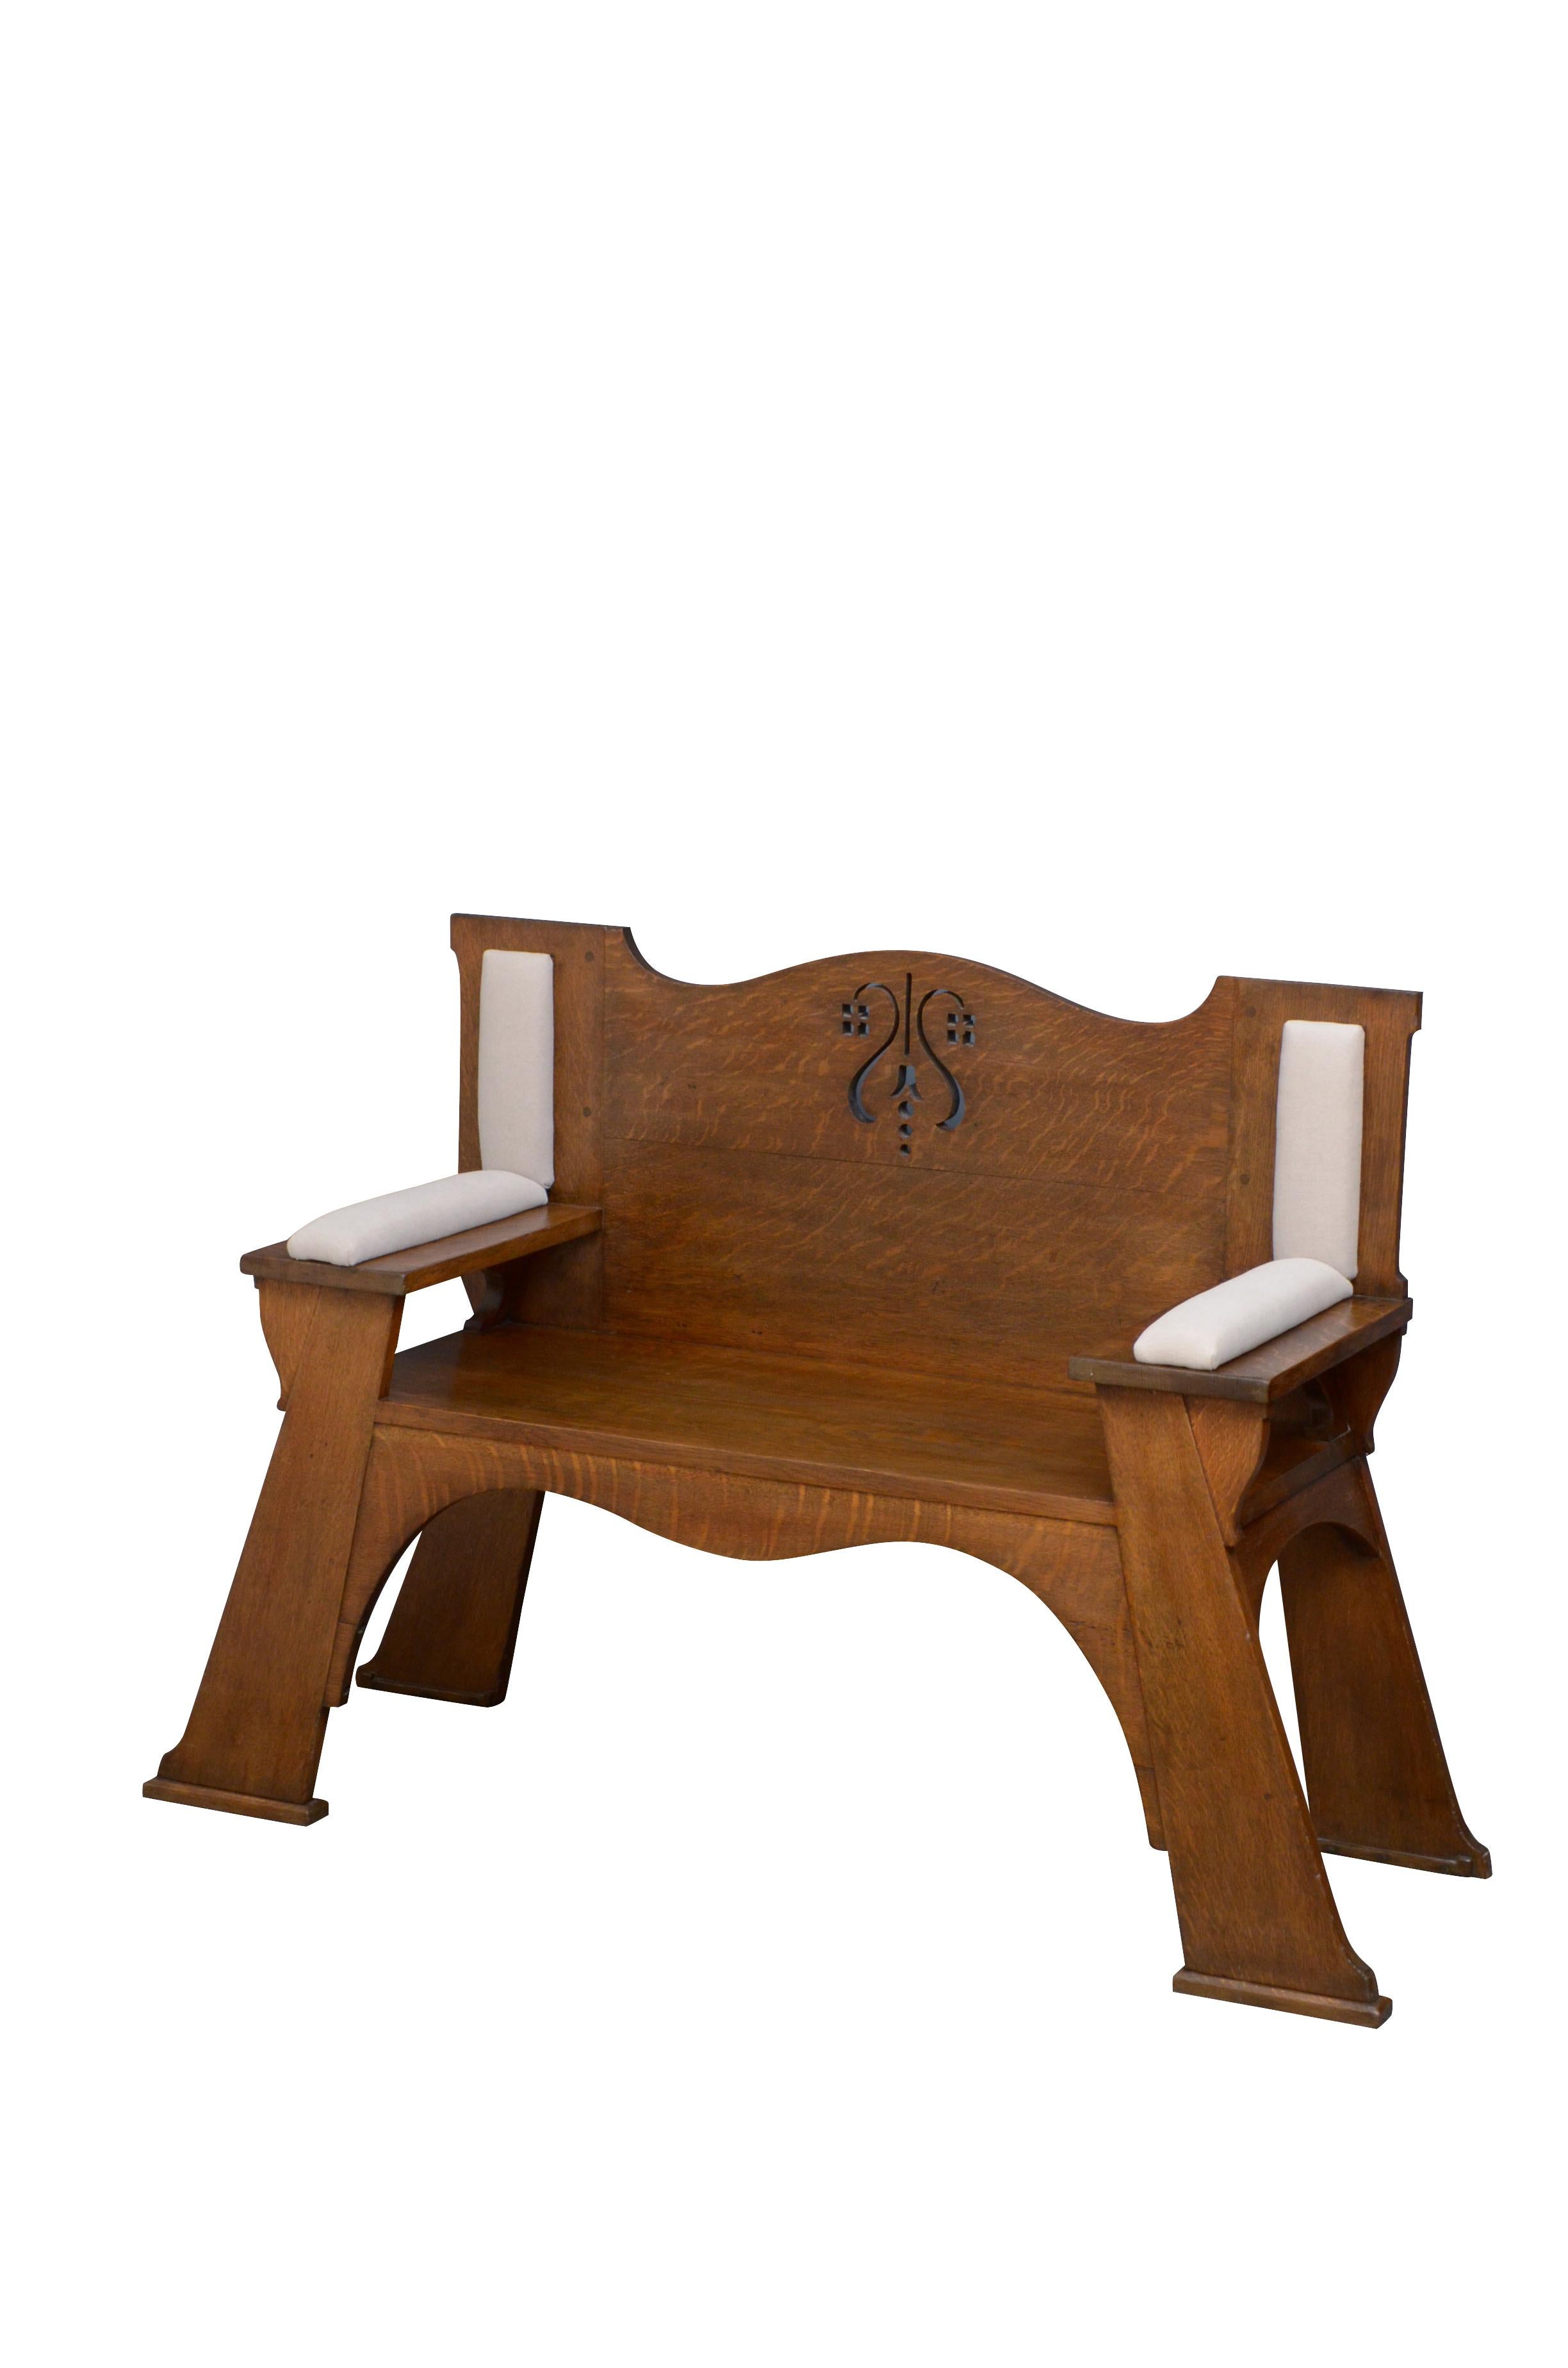 Substantial Arts & Crafts solid oak hall seat, having shaped and carved back and generous seat flanked by padded arms, all standing on outswept legs united by shaped apron. This antique bench retains its original finish, color and good patina, all